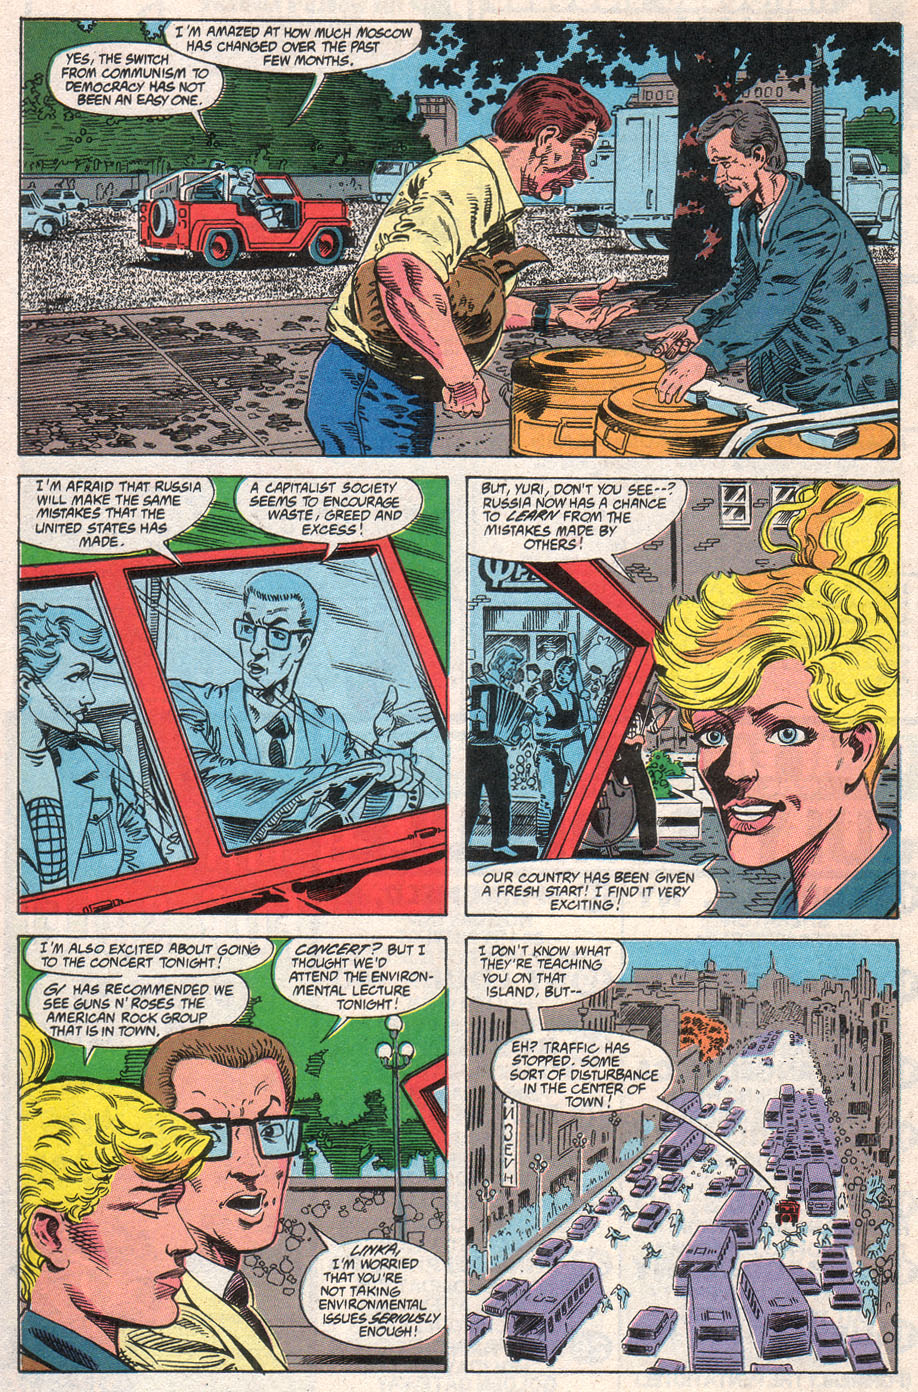 Captain Planet and the Planeteers 10 Page 23